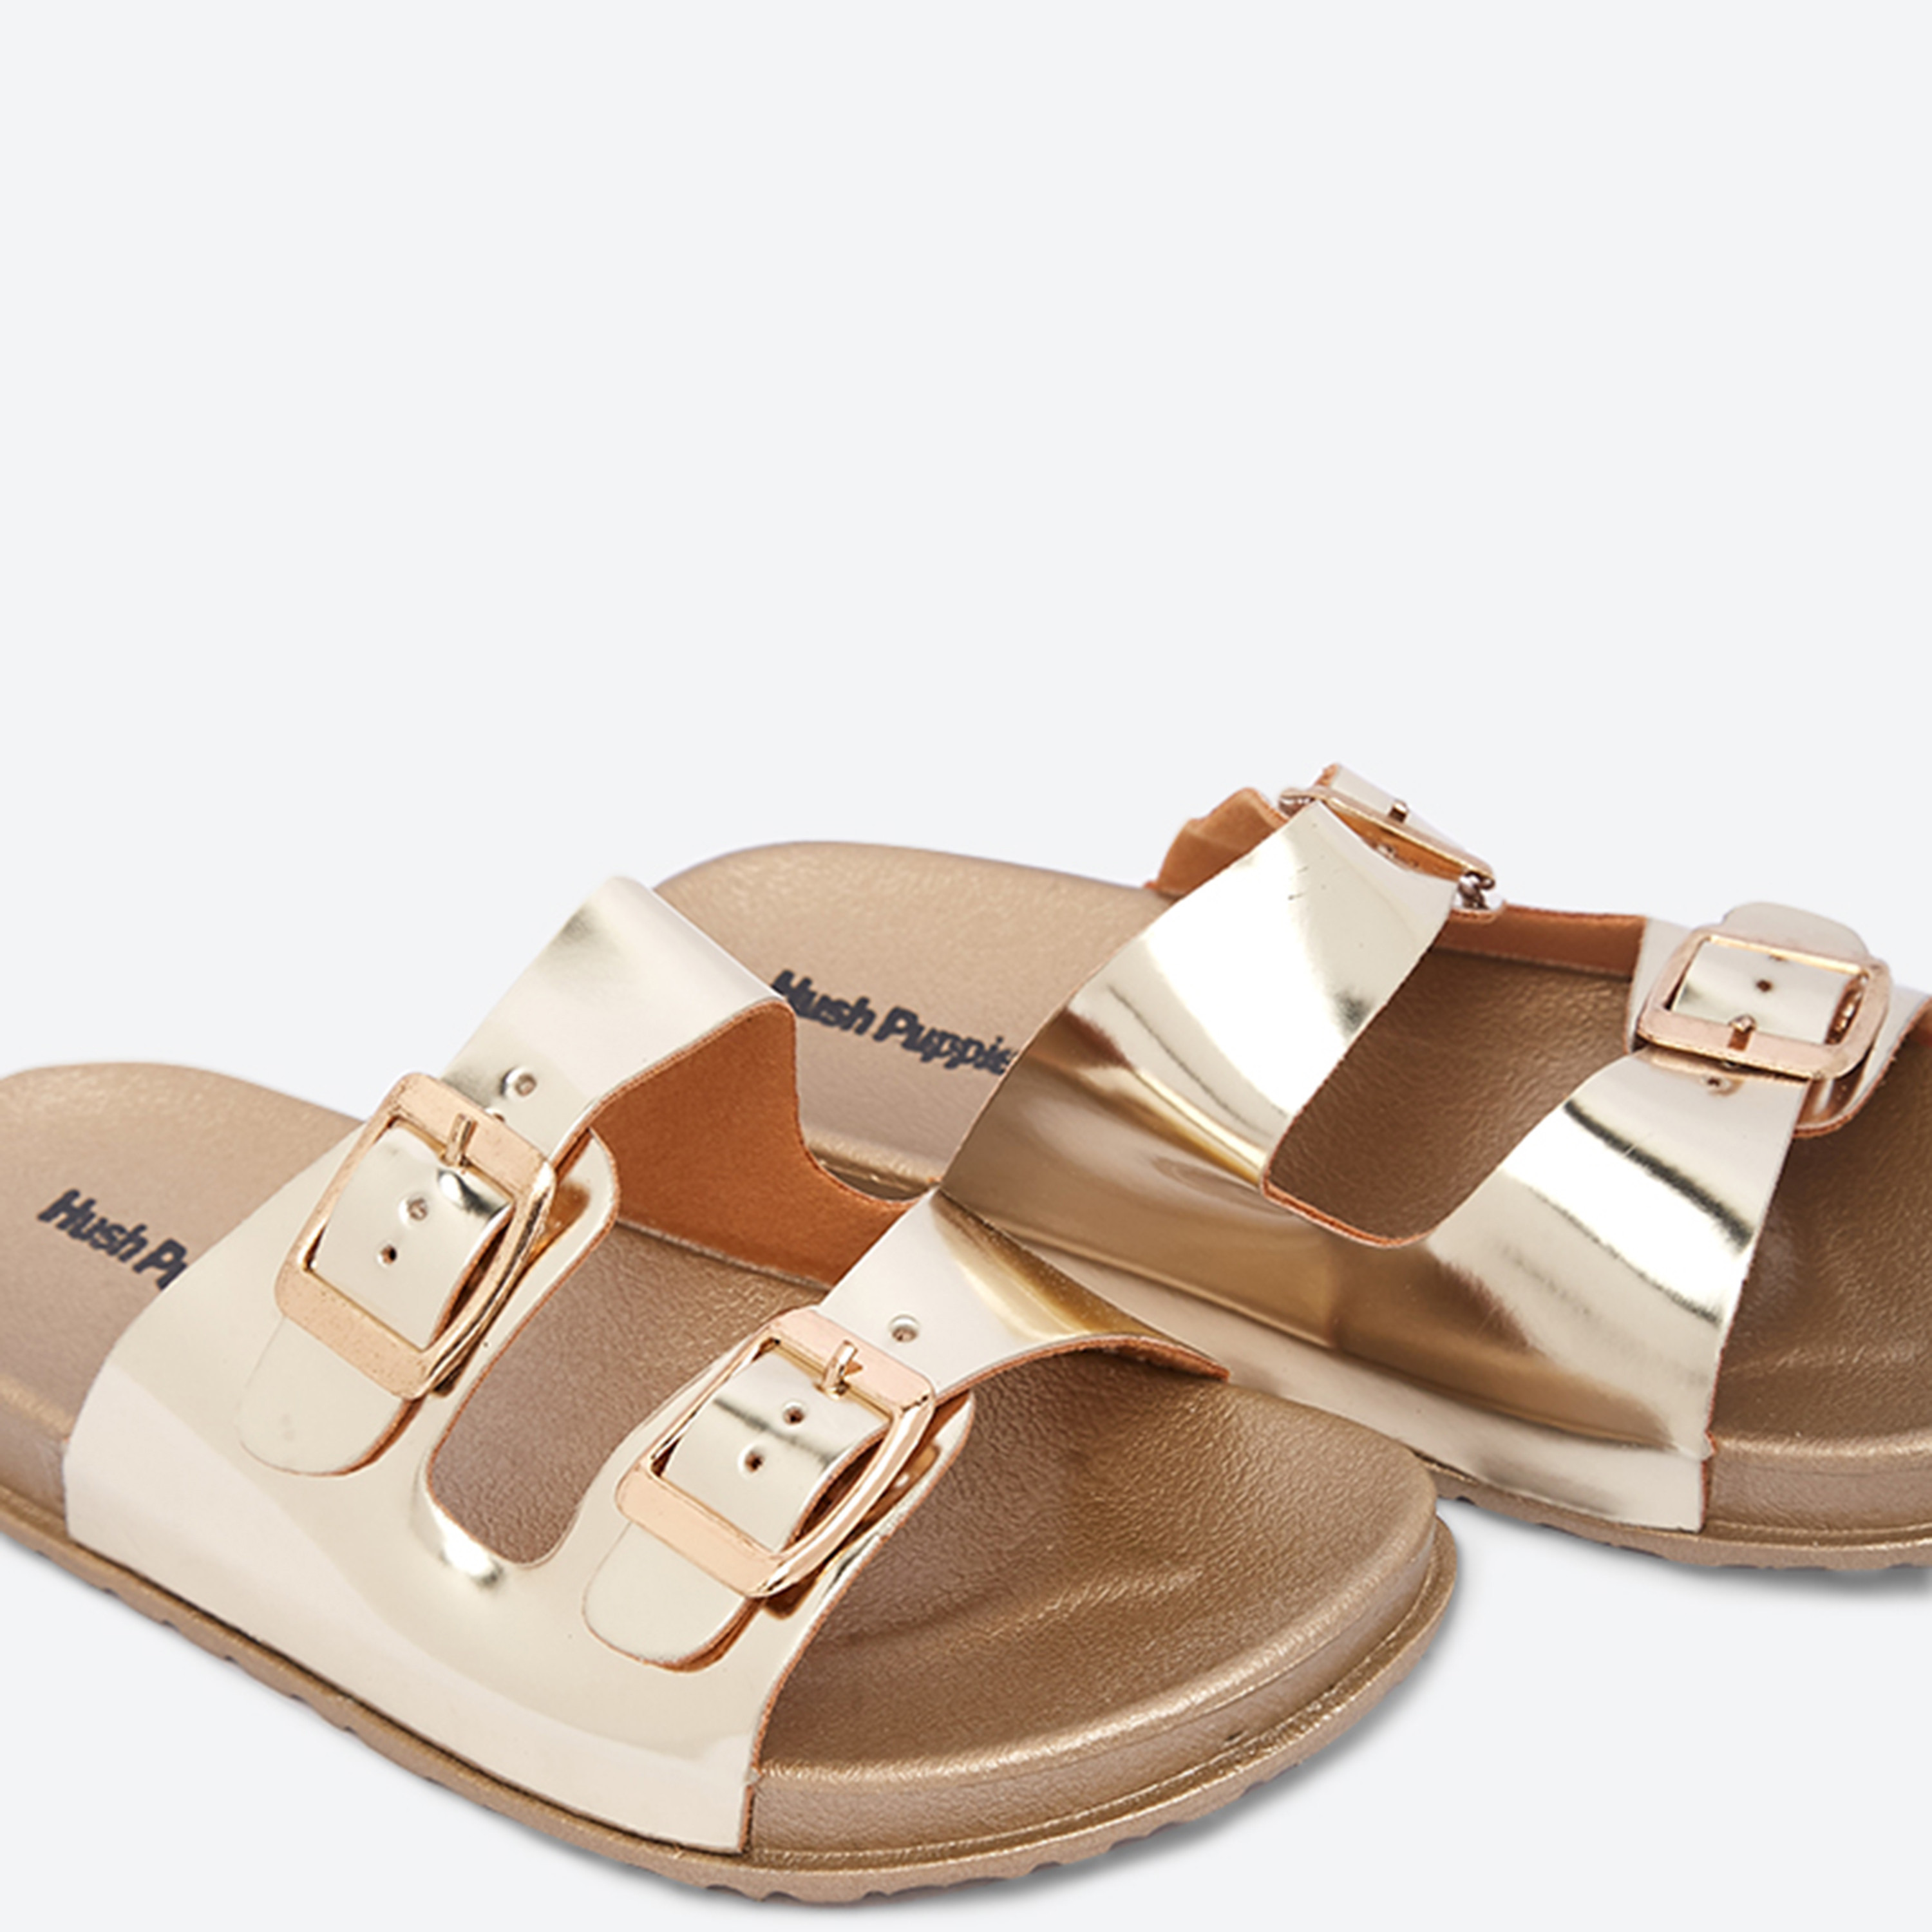 Hush Puppies Coco Wedge Sandal - Free Shipping | DSW